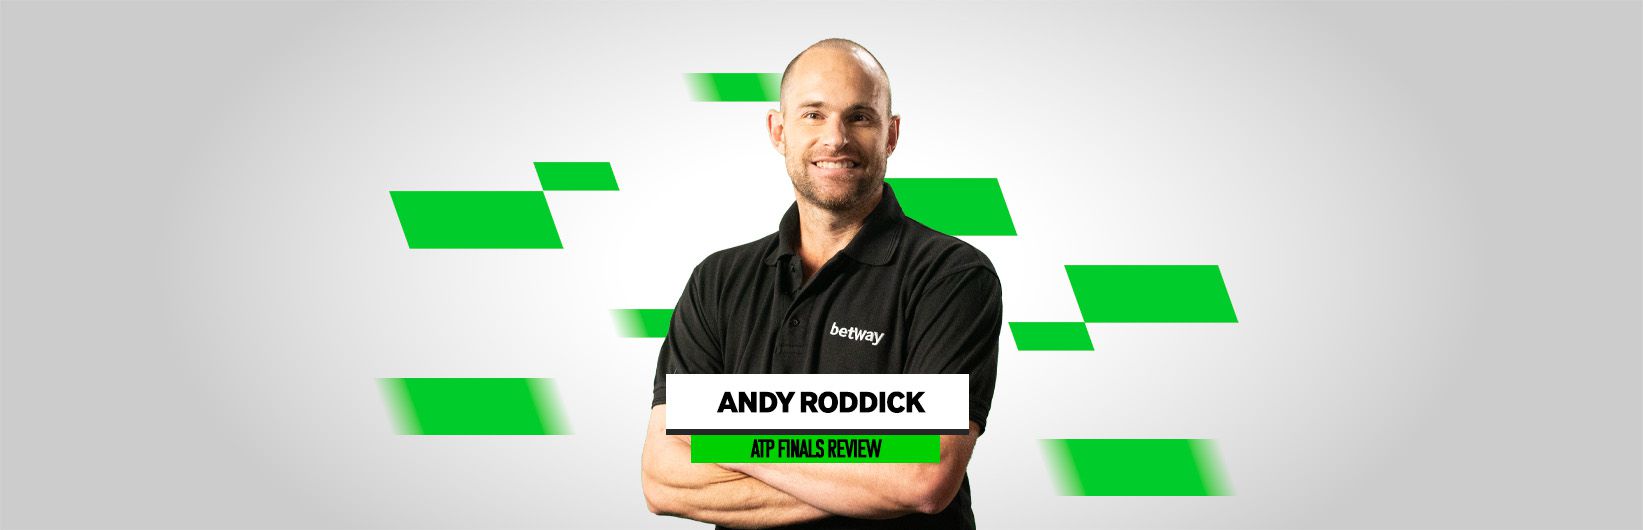 Andy Roddick: Connors’ record will be Novak’s next obsession